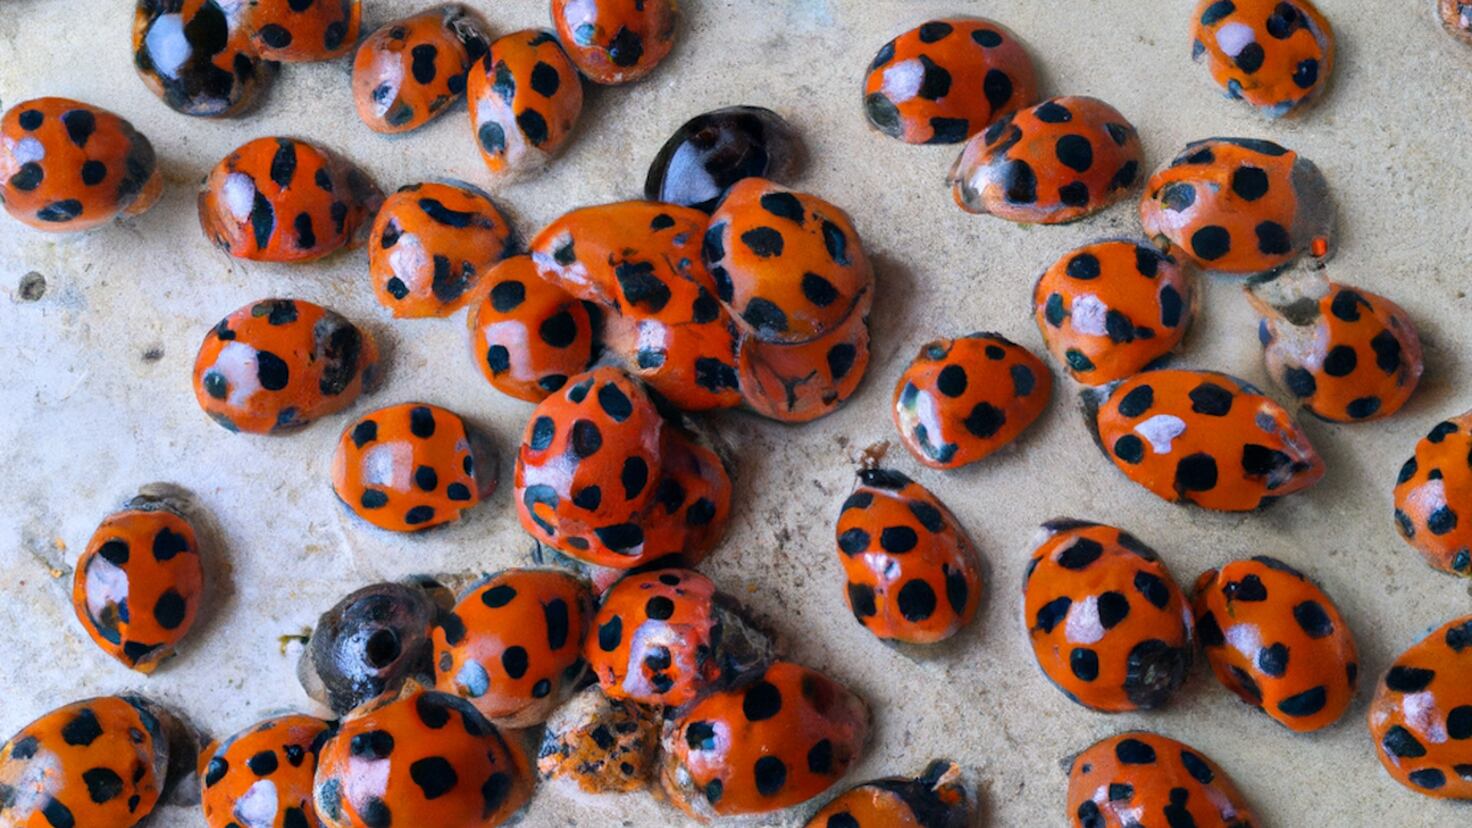 Lady beetle invasion - Insects in the City